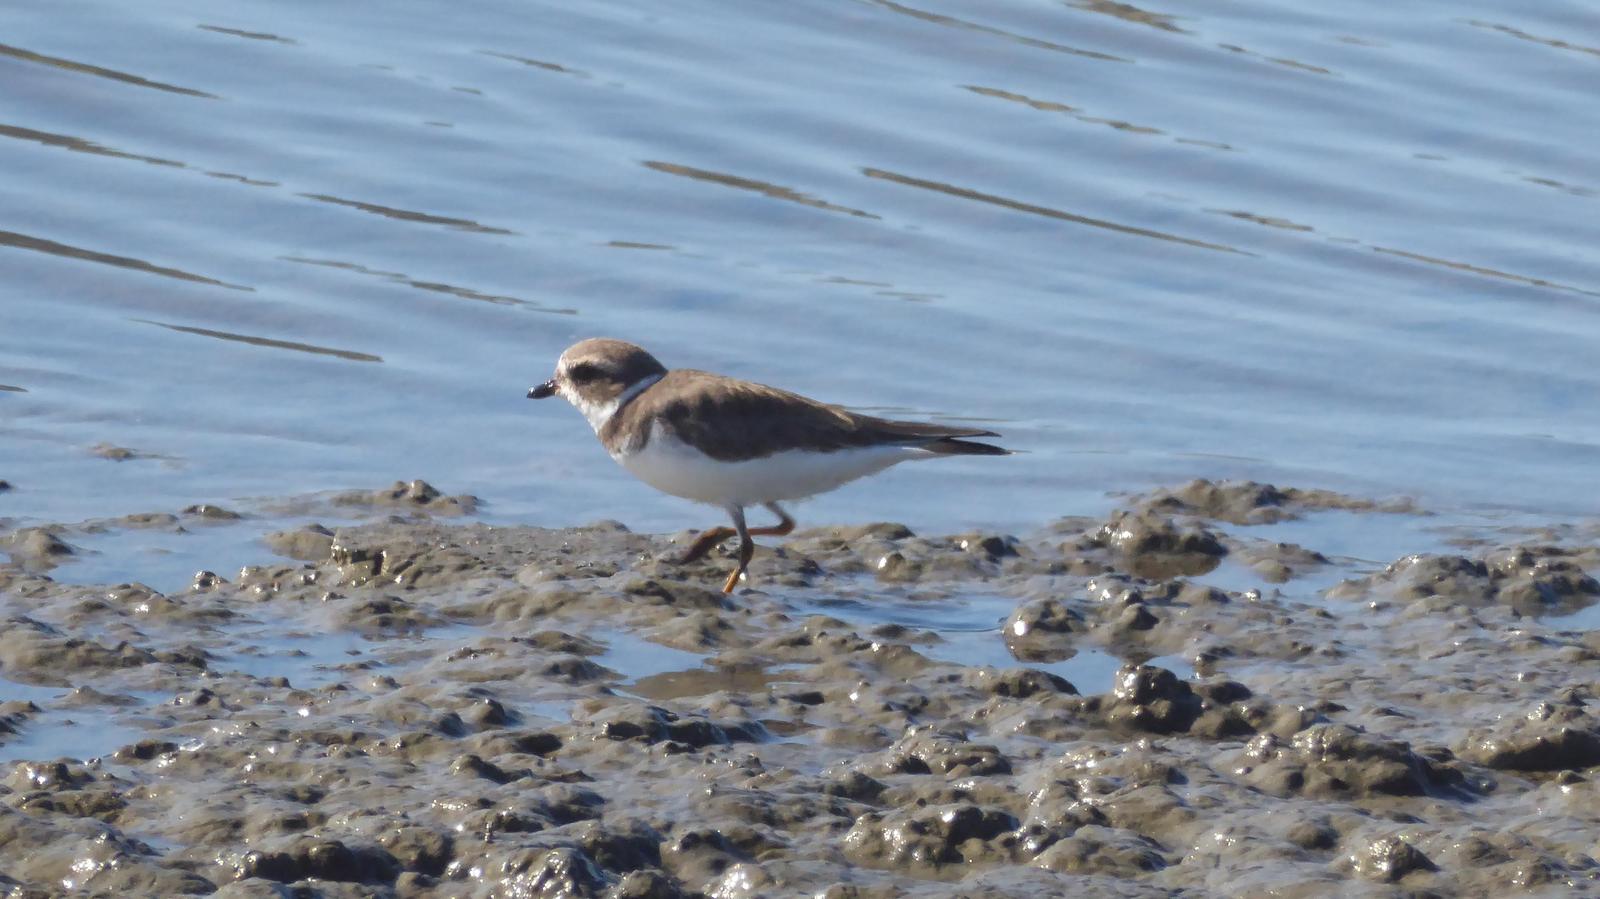 Semipalmated Plover Photo by Daliel Leite